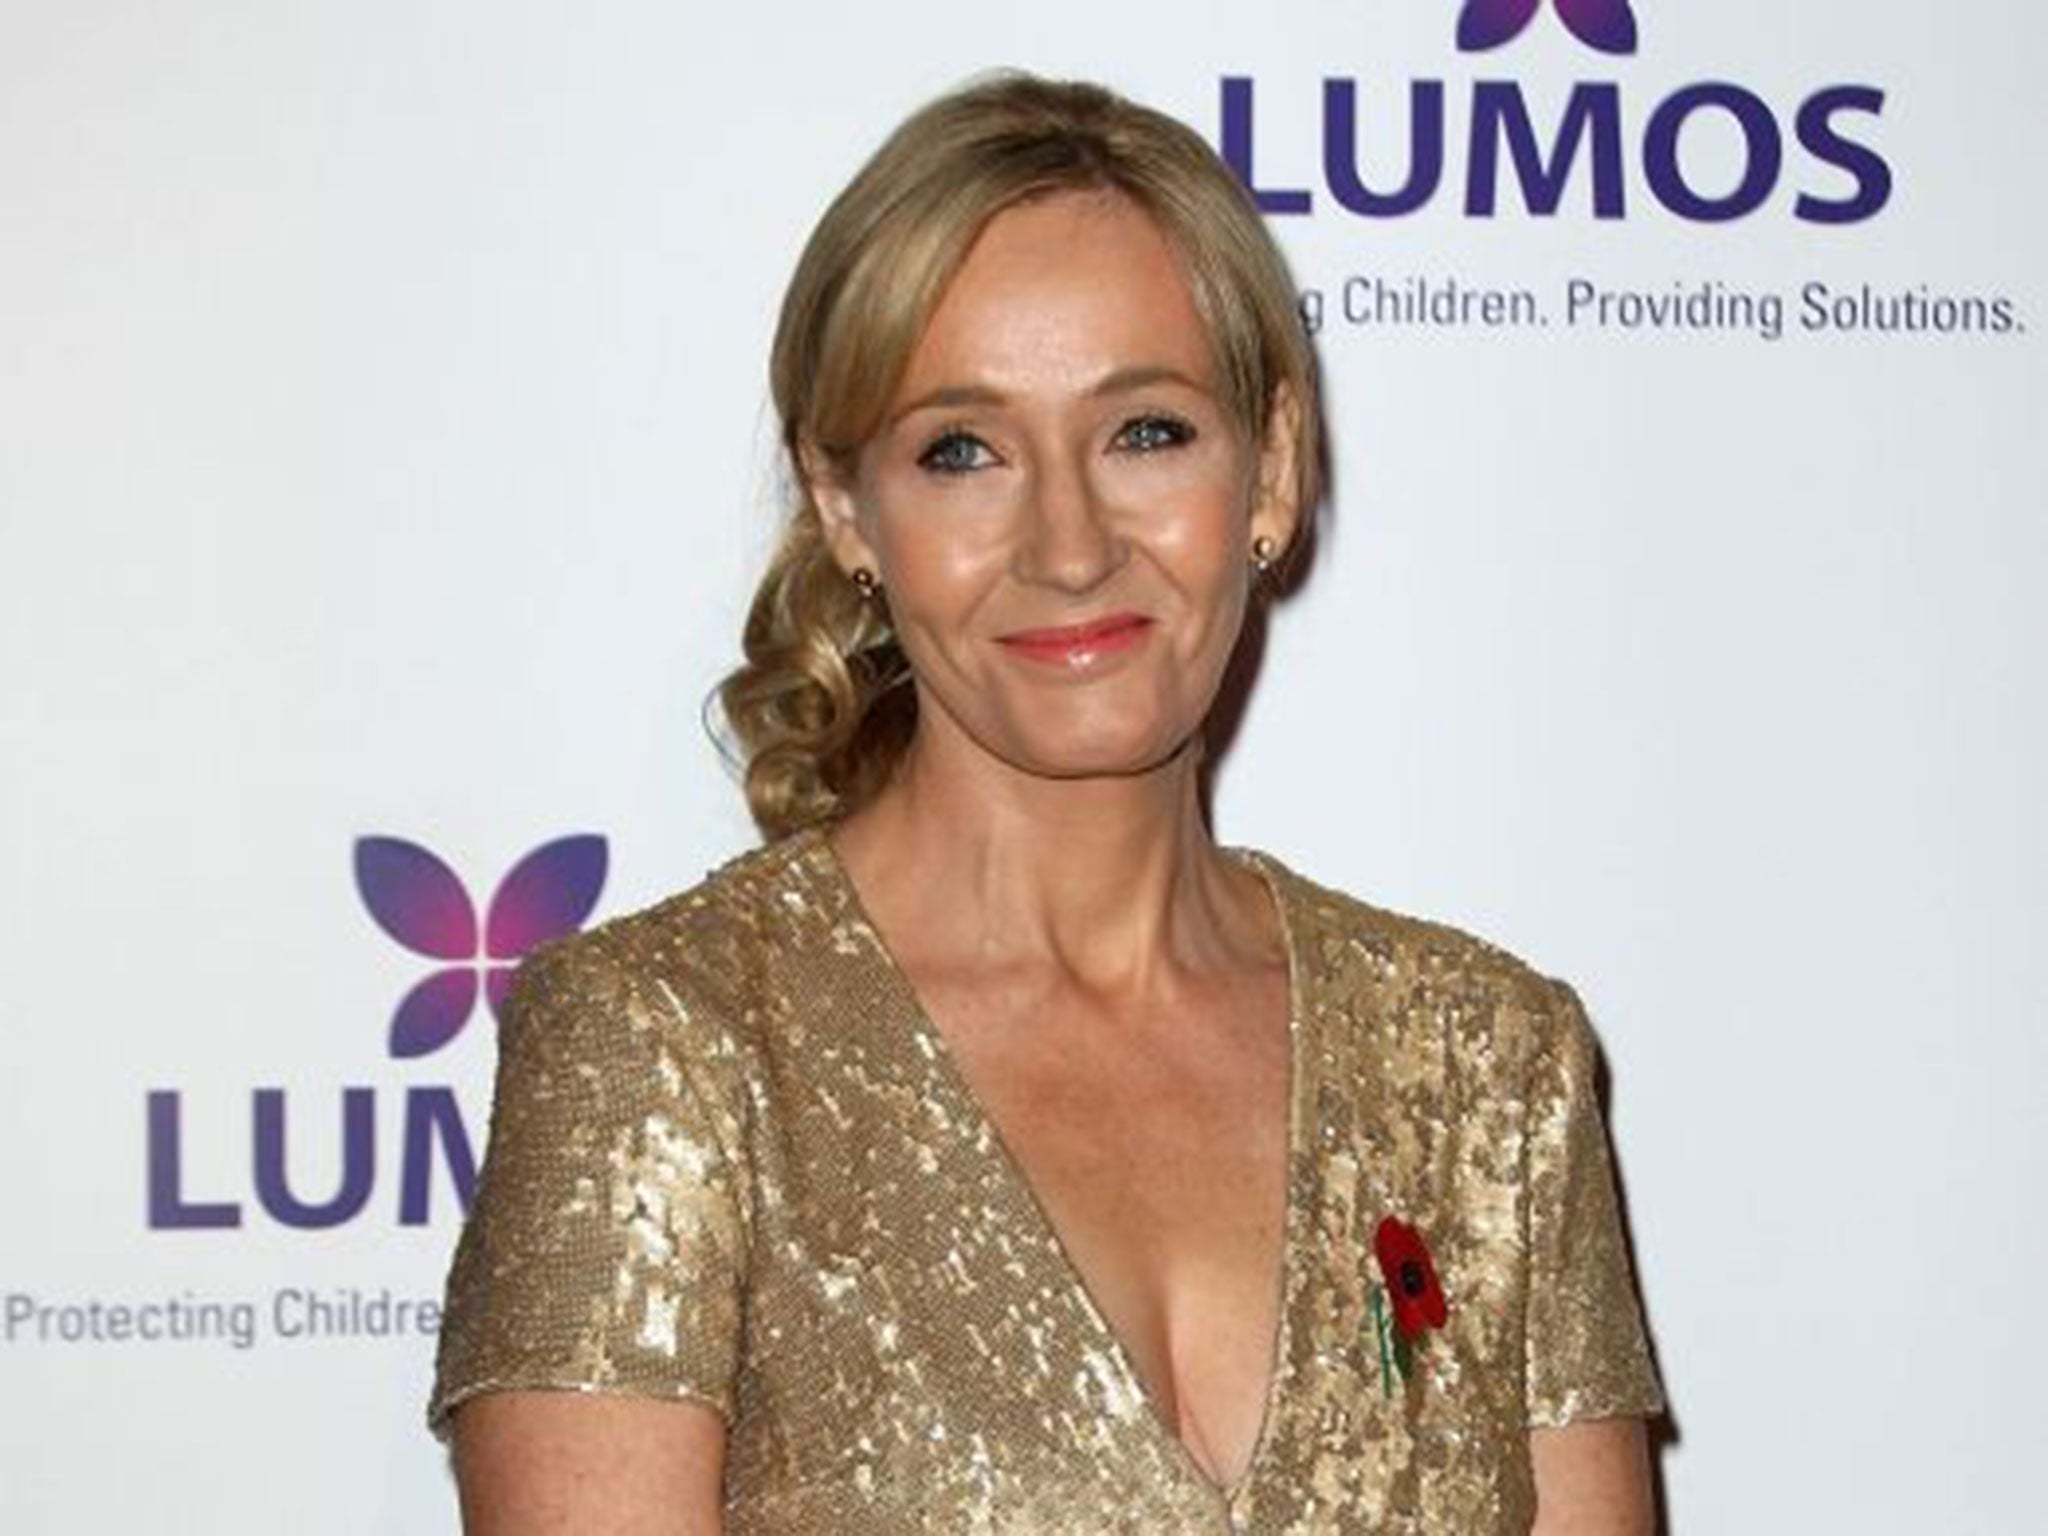 JK Rowling hosted a charity evening to raise funds for 'Lumos'